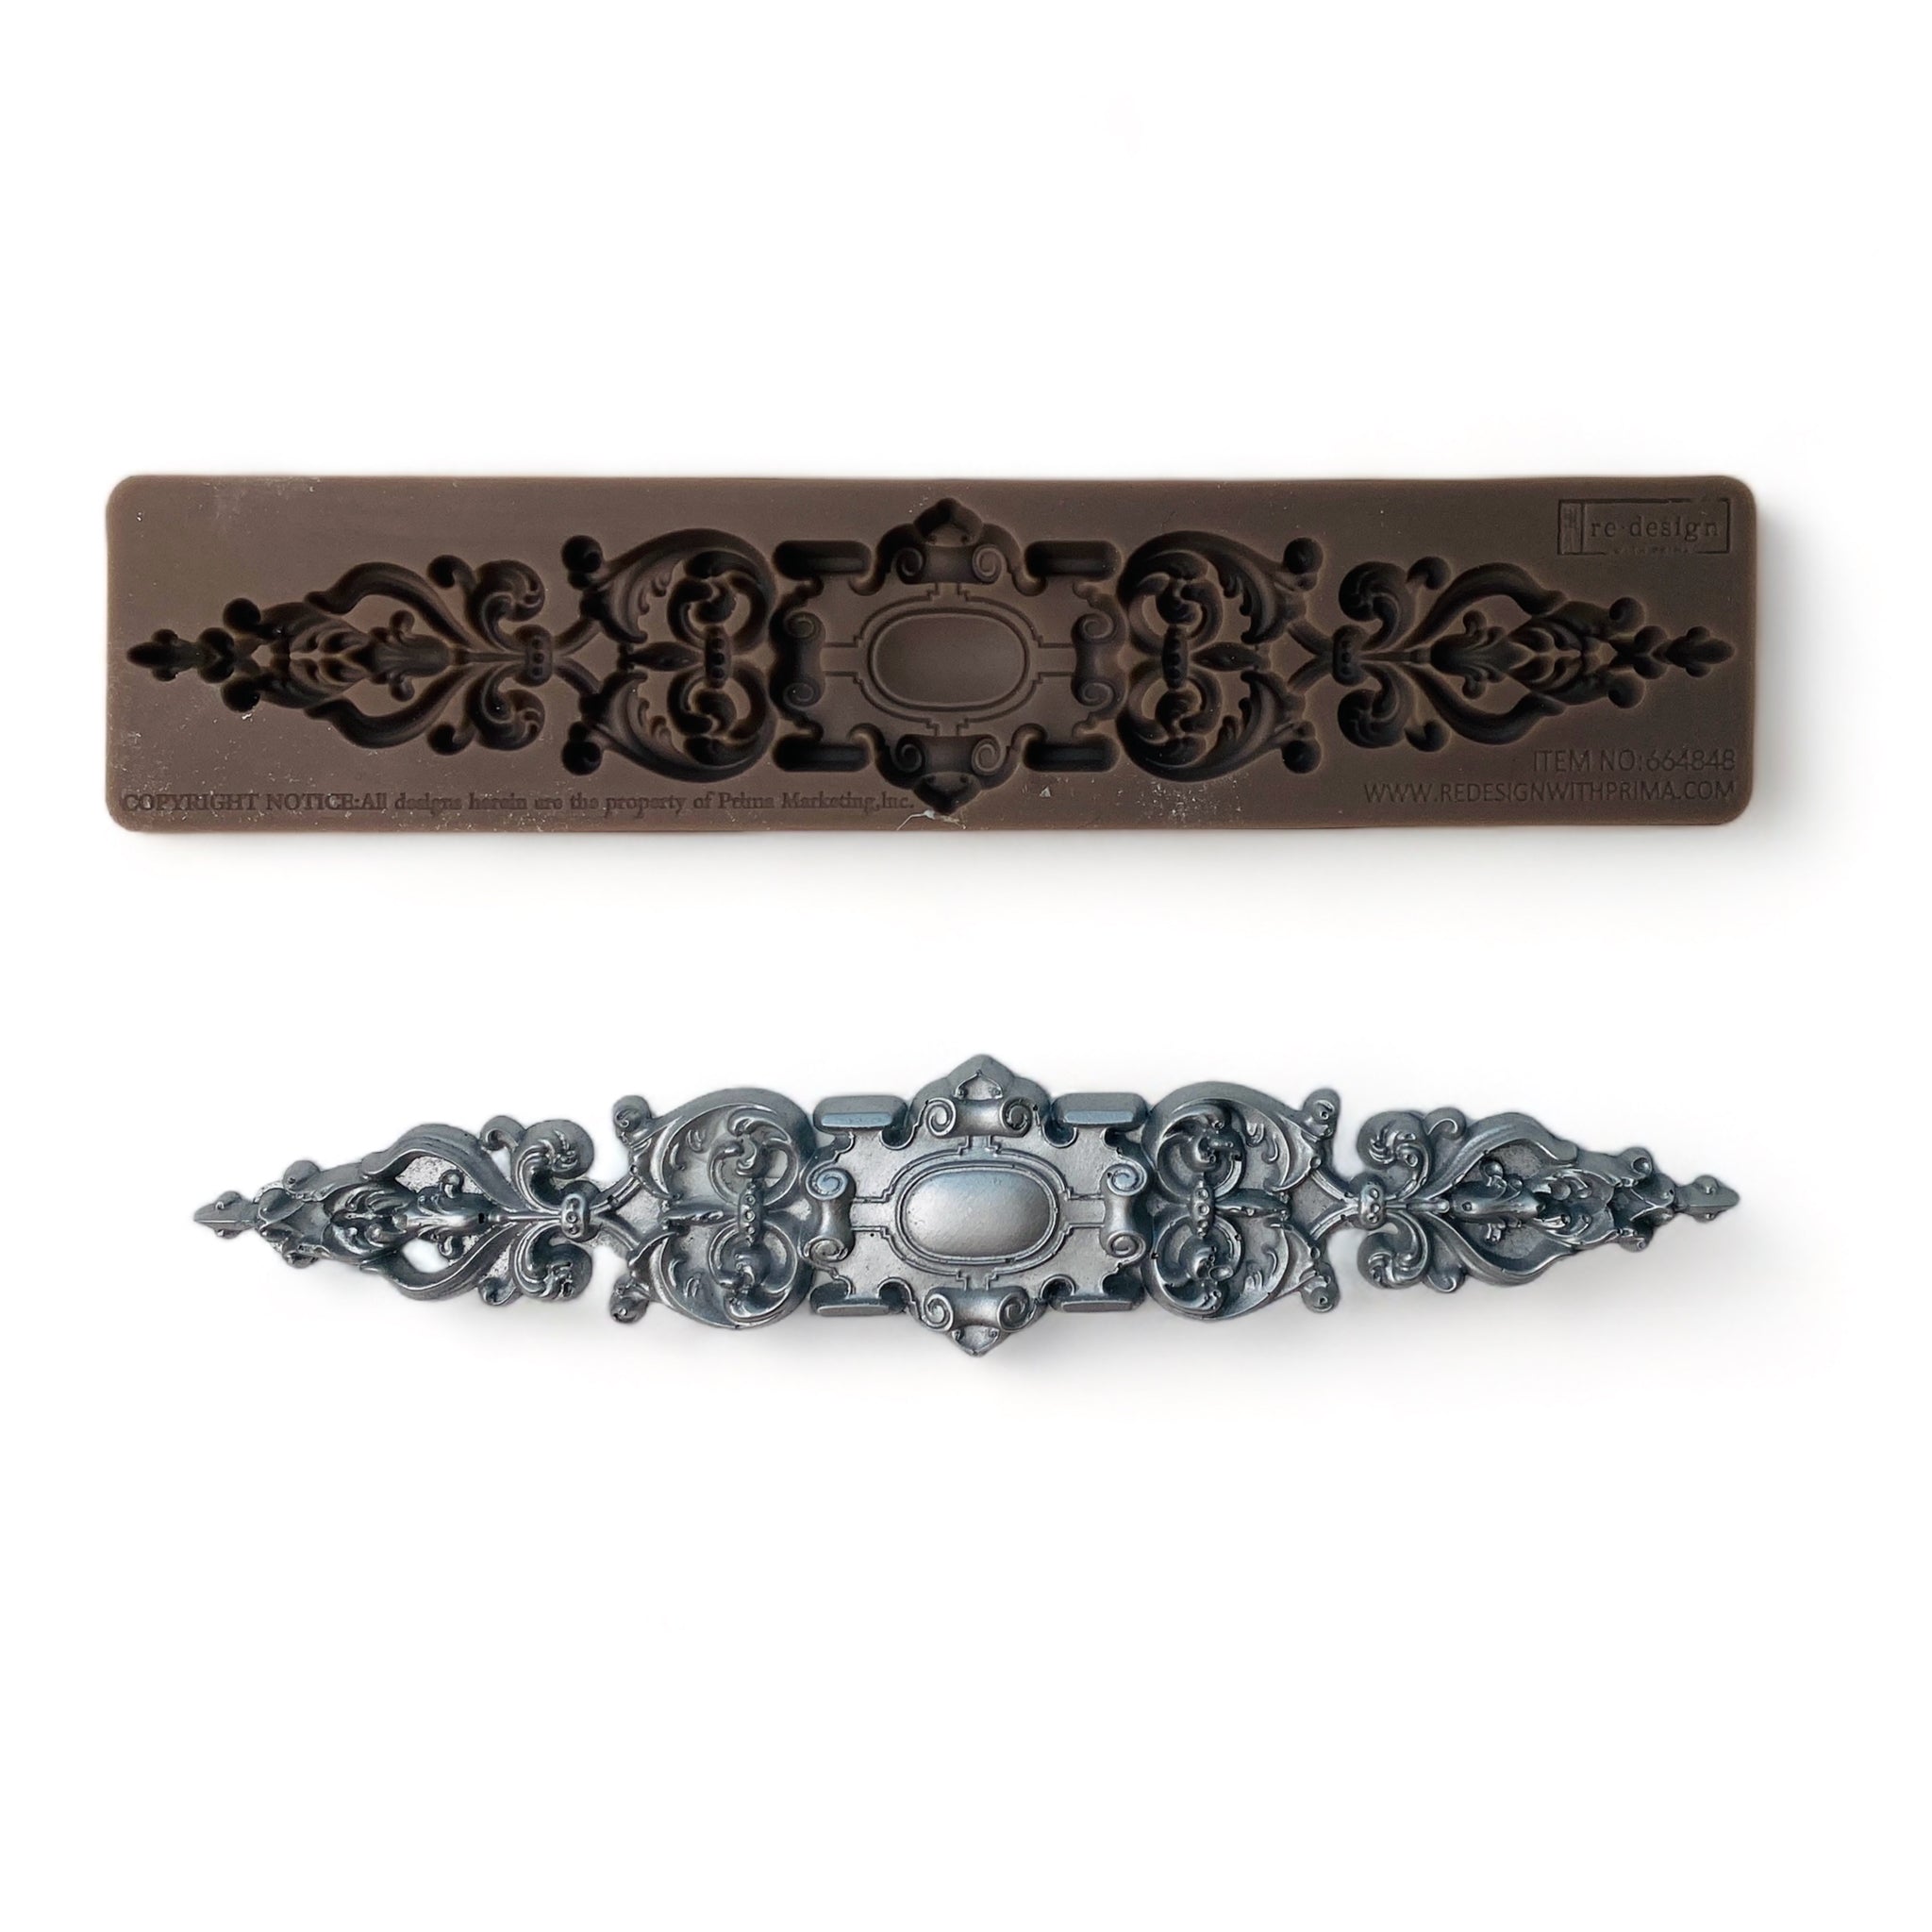 A brown silicone mold and silver colored casting of a long, ornate, scroll decorative center medallion are against a white background.